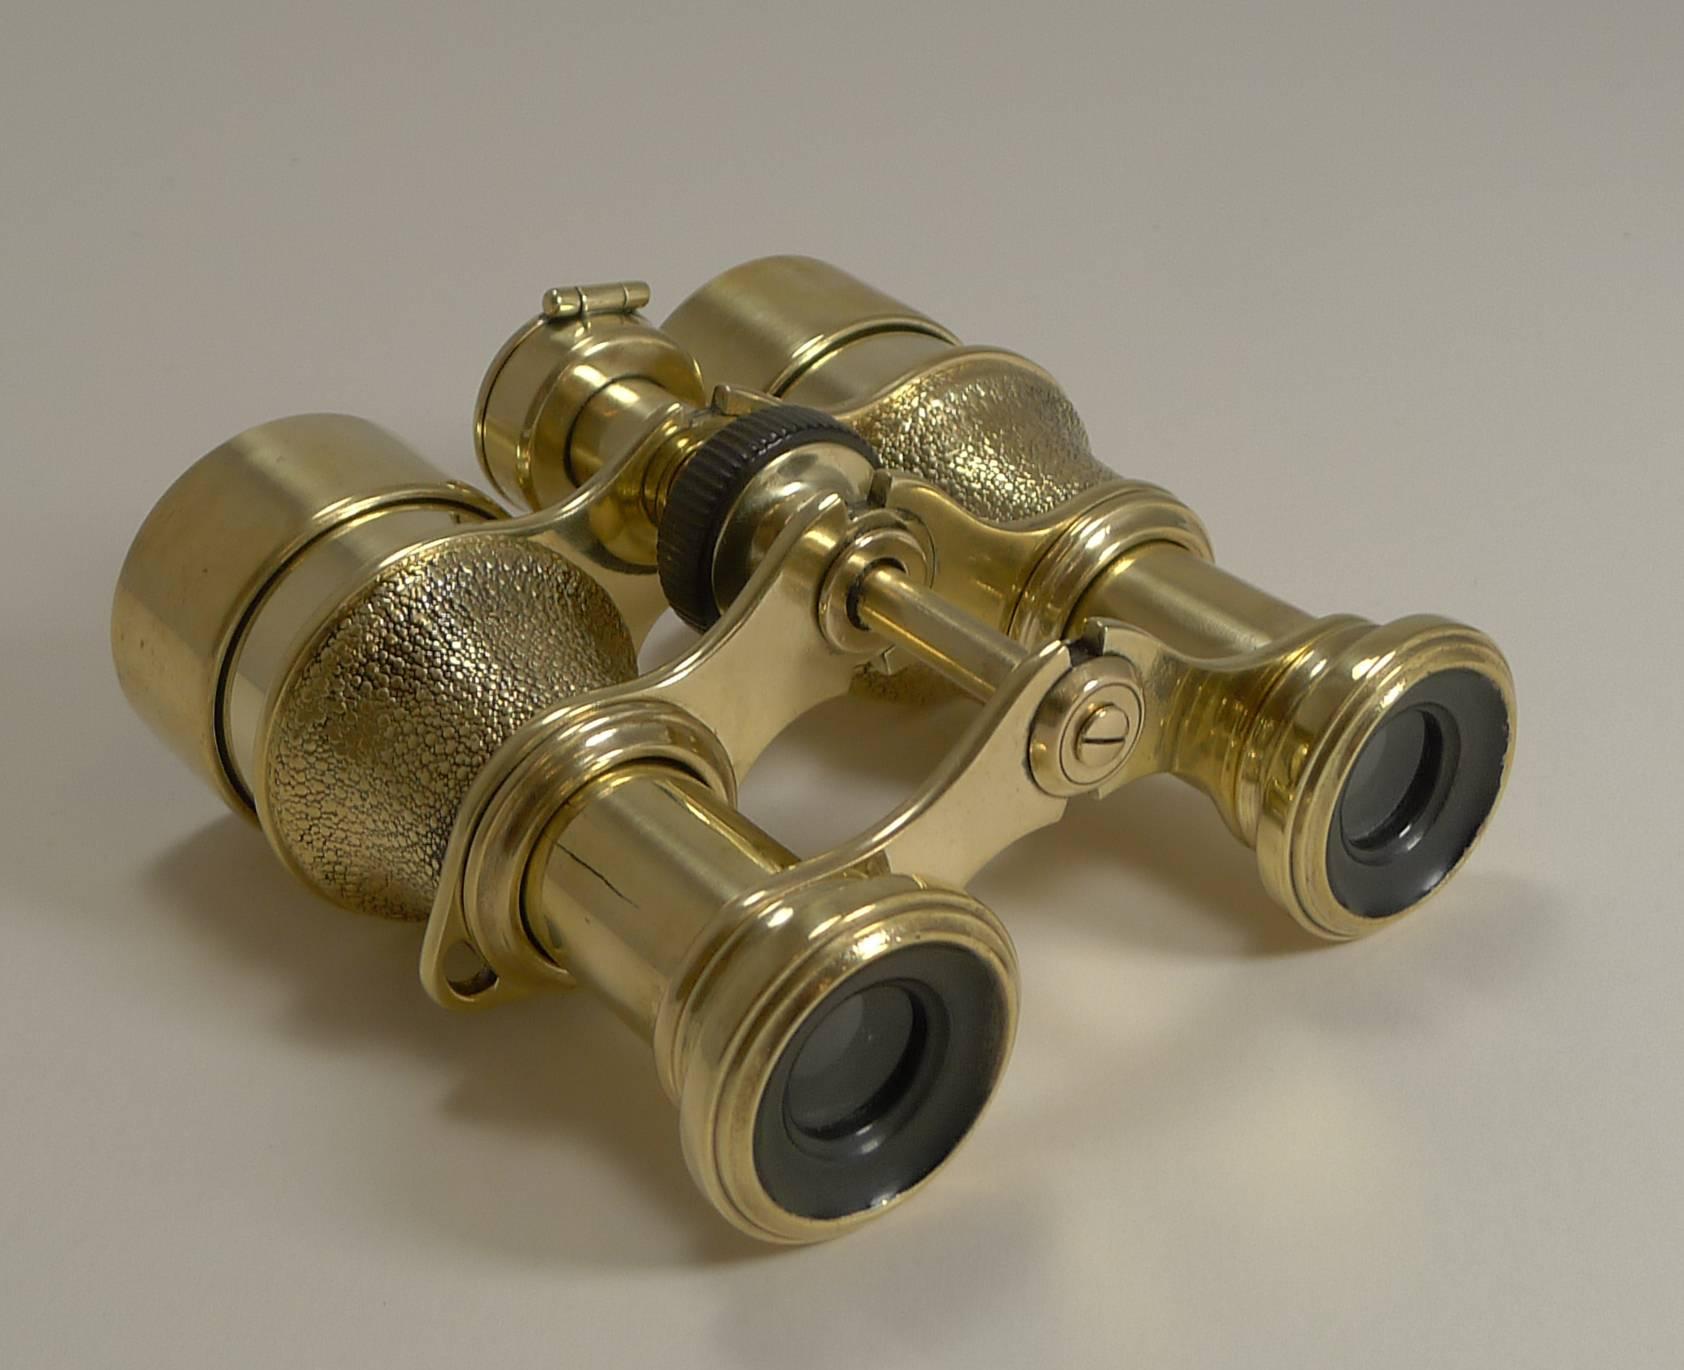 Edwardian Antique English Field Glasses or Binoculars by Lawrence and Mayo, with Compass